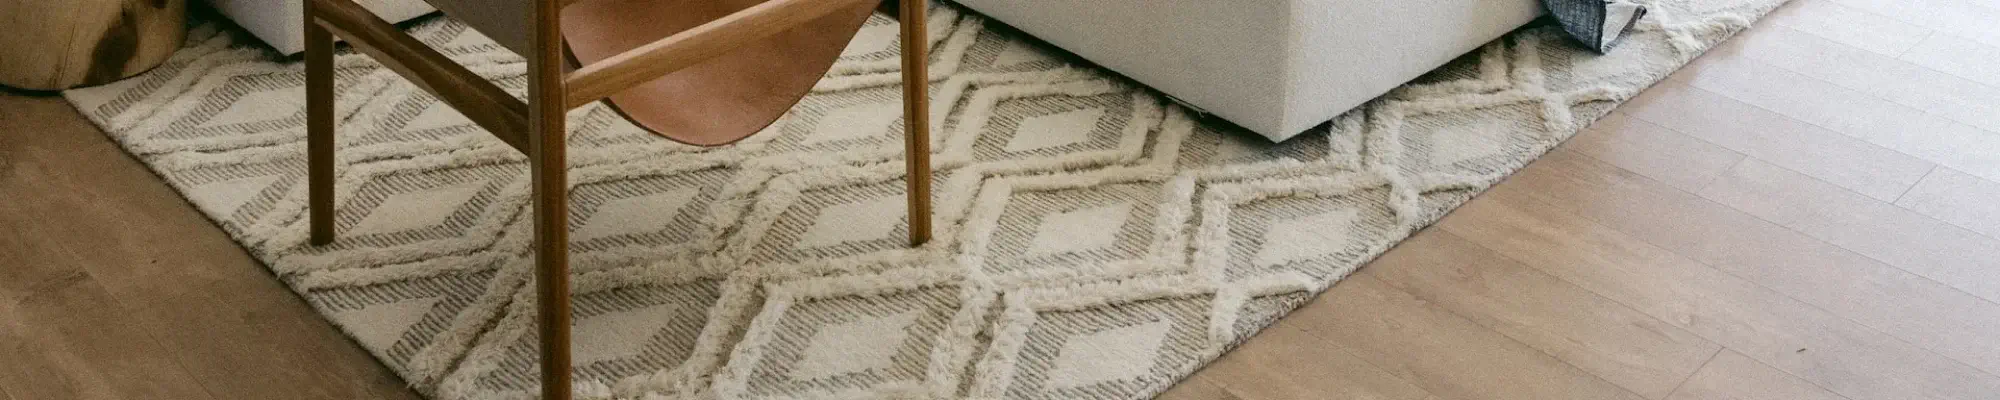 Learn more about area rugs options at Riemer Floors